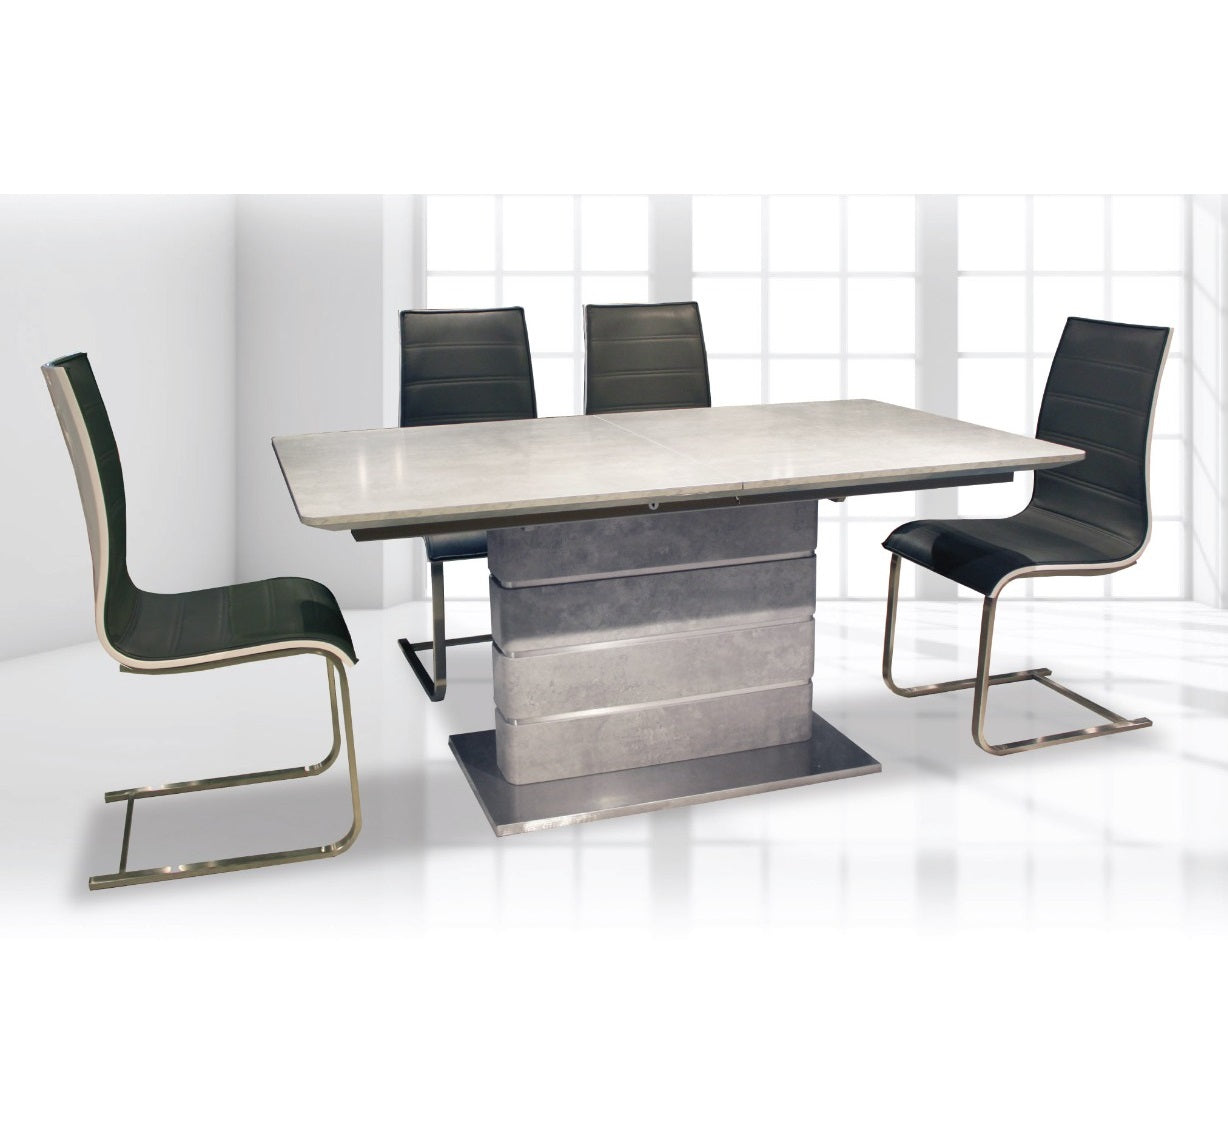 JA4537 Extension Dining Table + (4) HD763S Dining Chair Grey PU